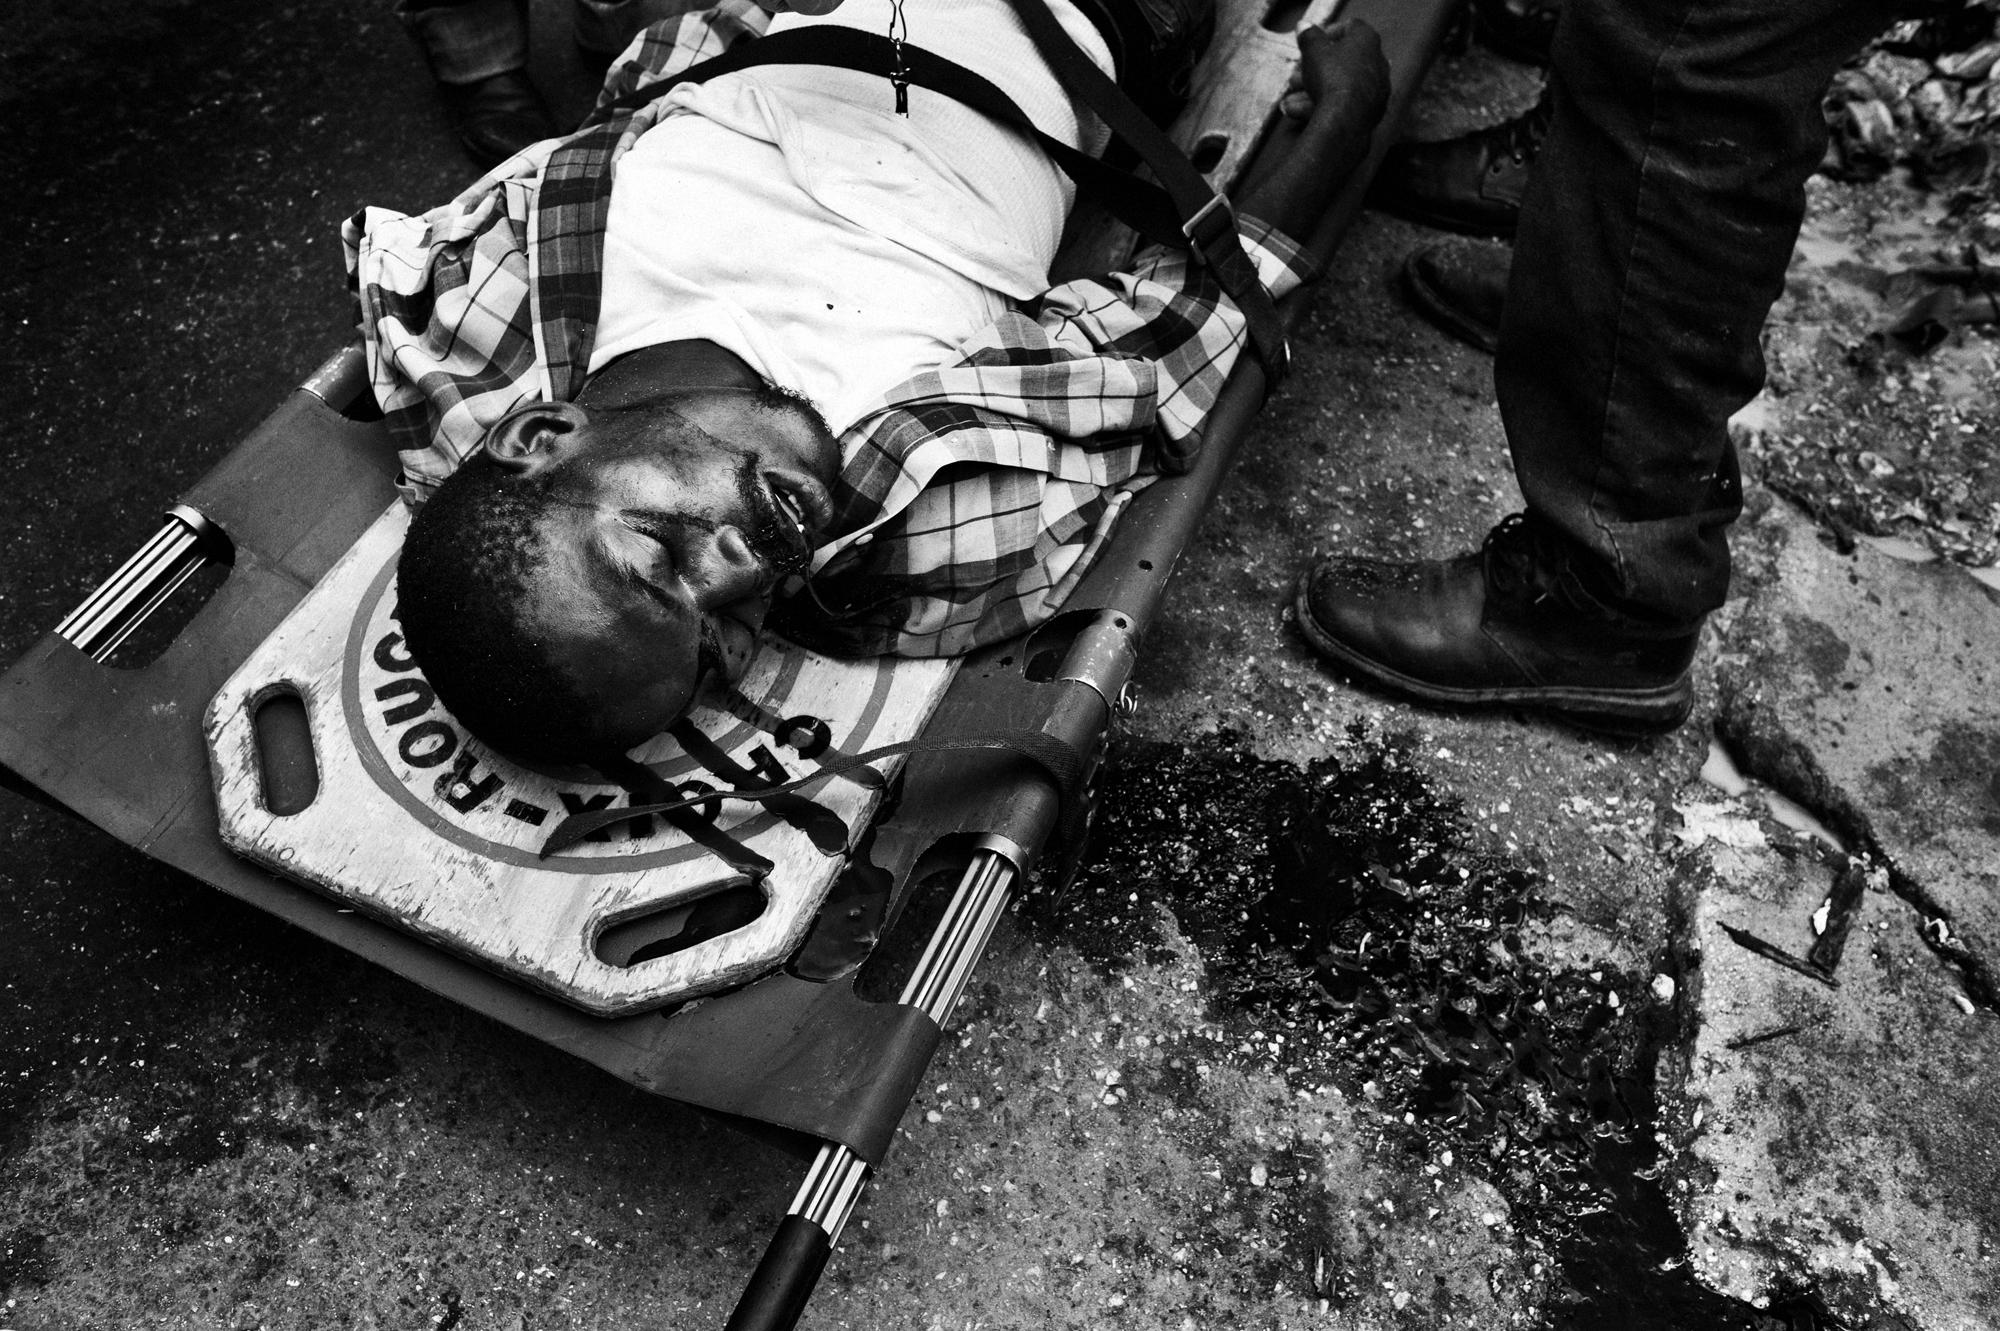 Private hell - Port au Prince.June 2010.An injured man that had a...